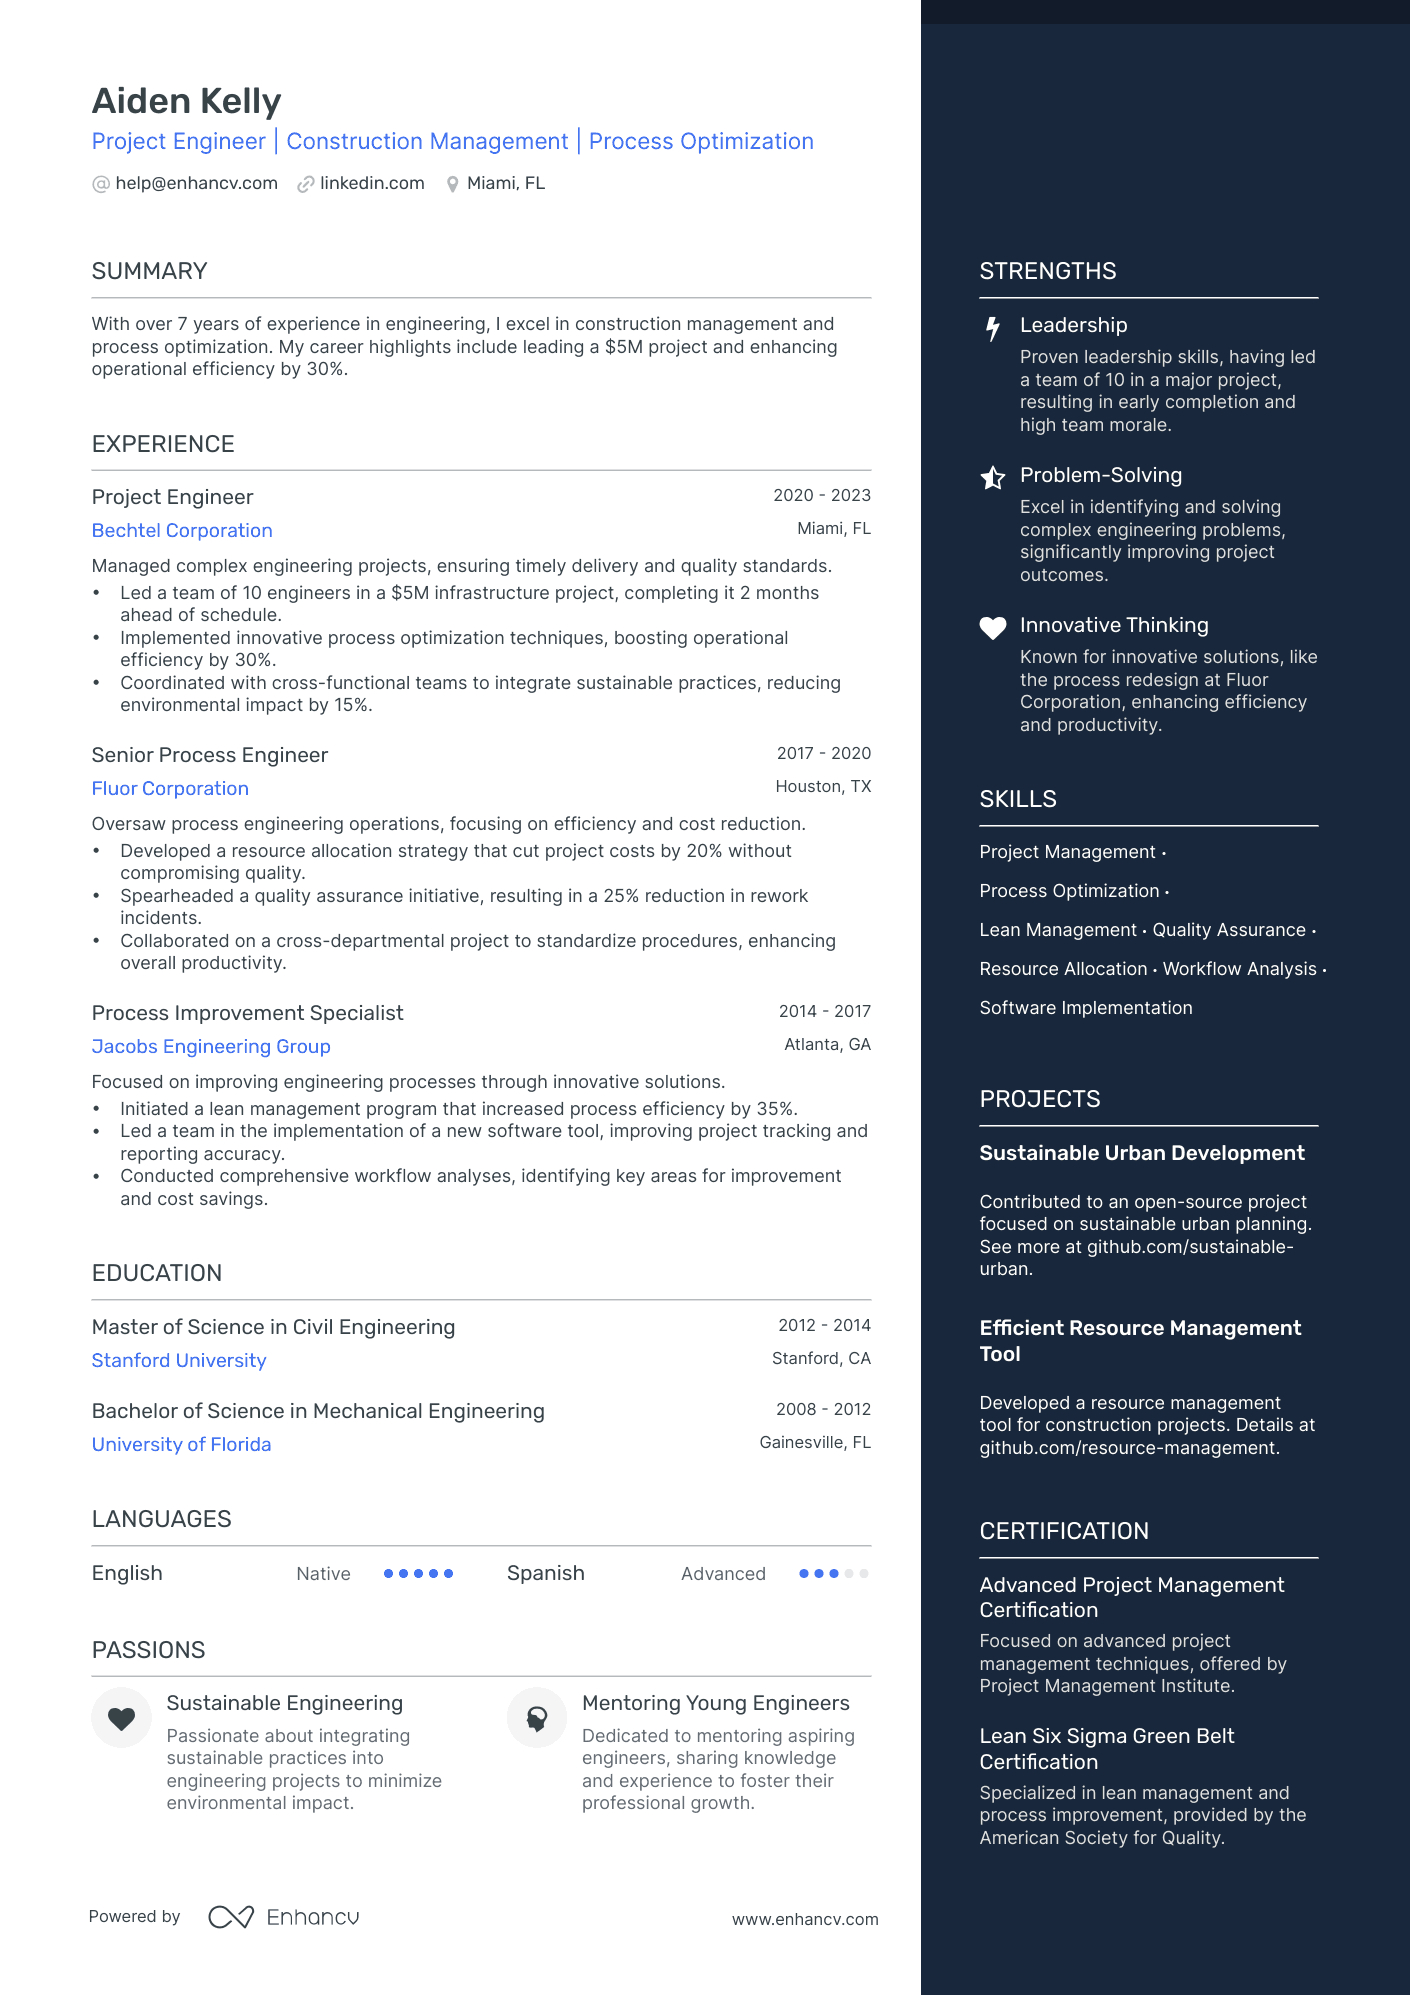 Project Engineer | Construction Management | Process Optimization resume example